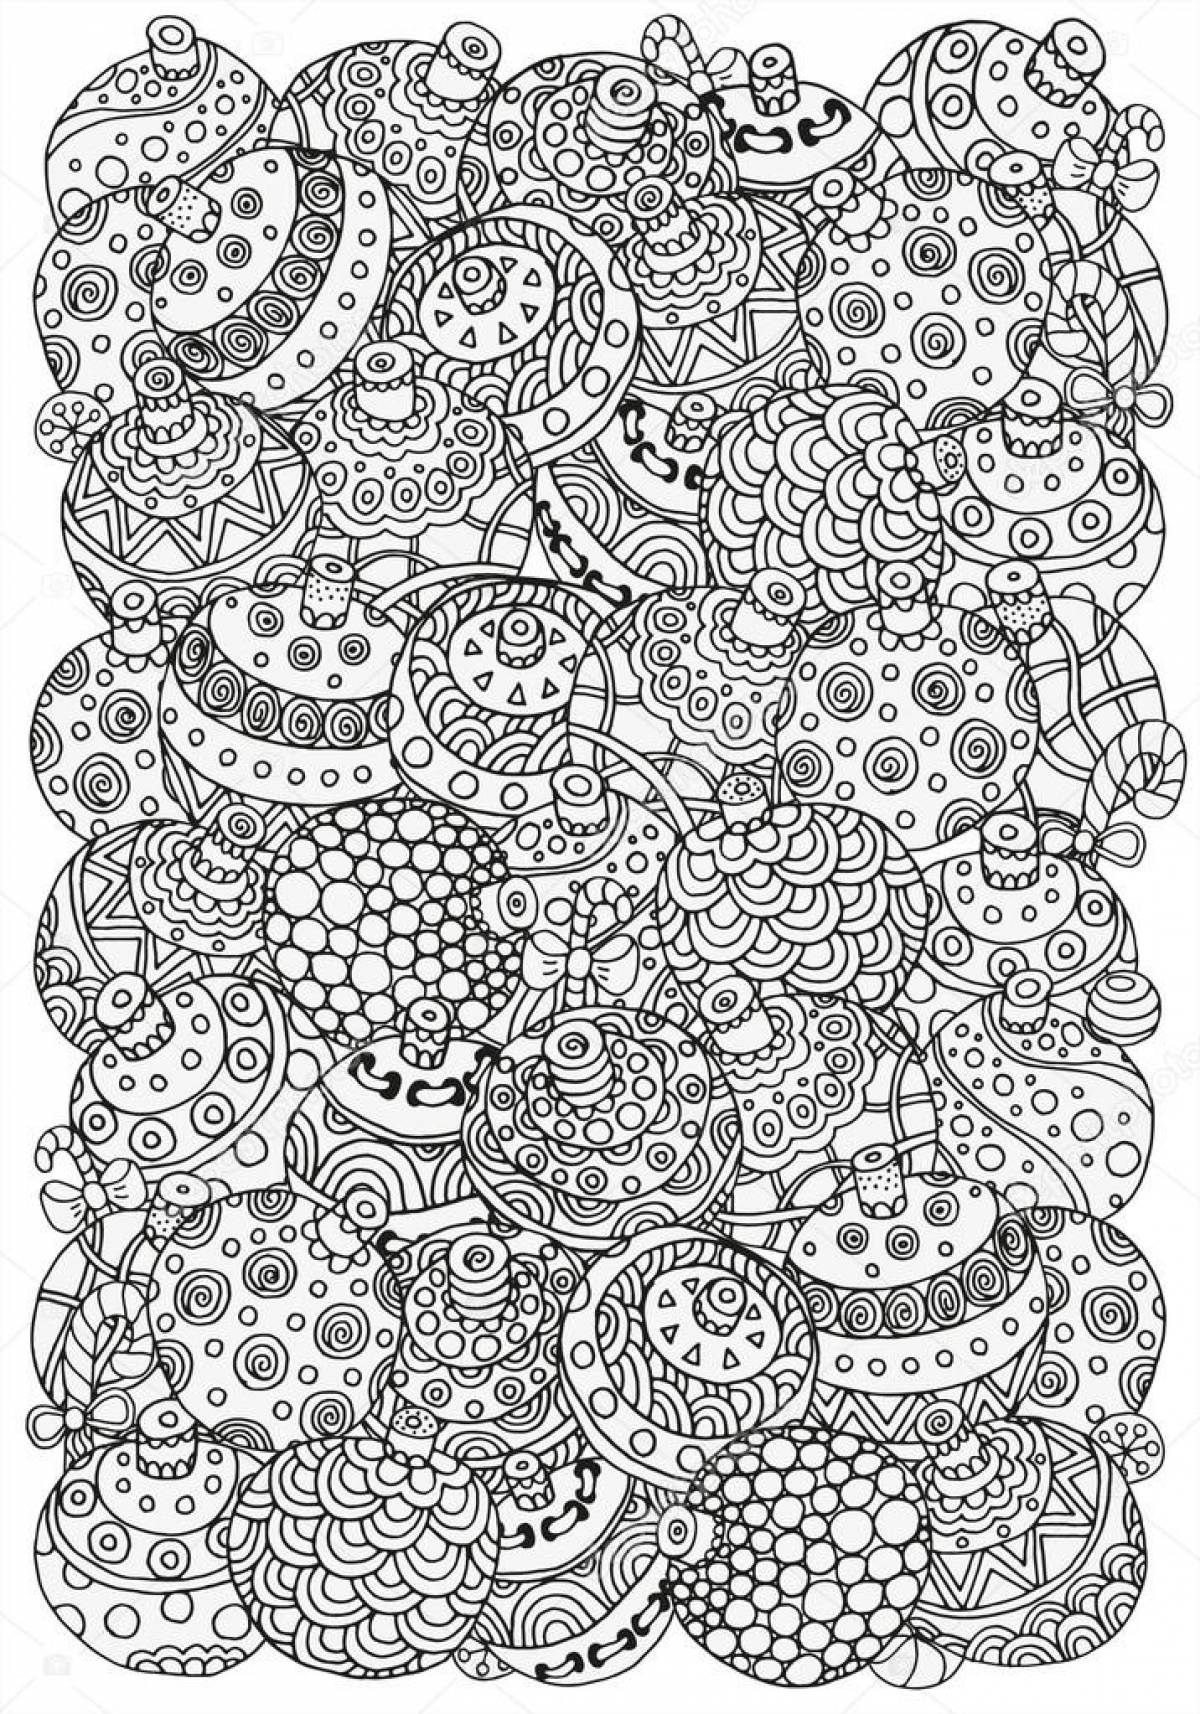 New Year antistress coloring page